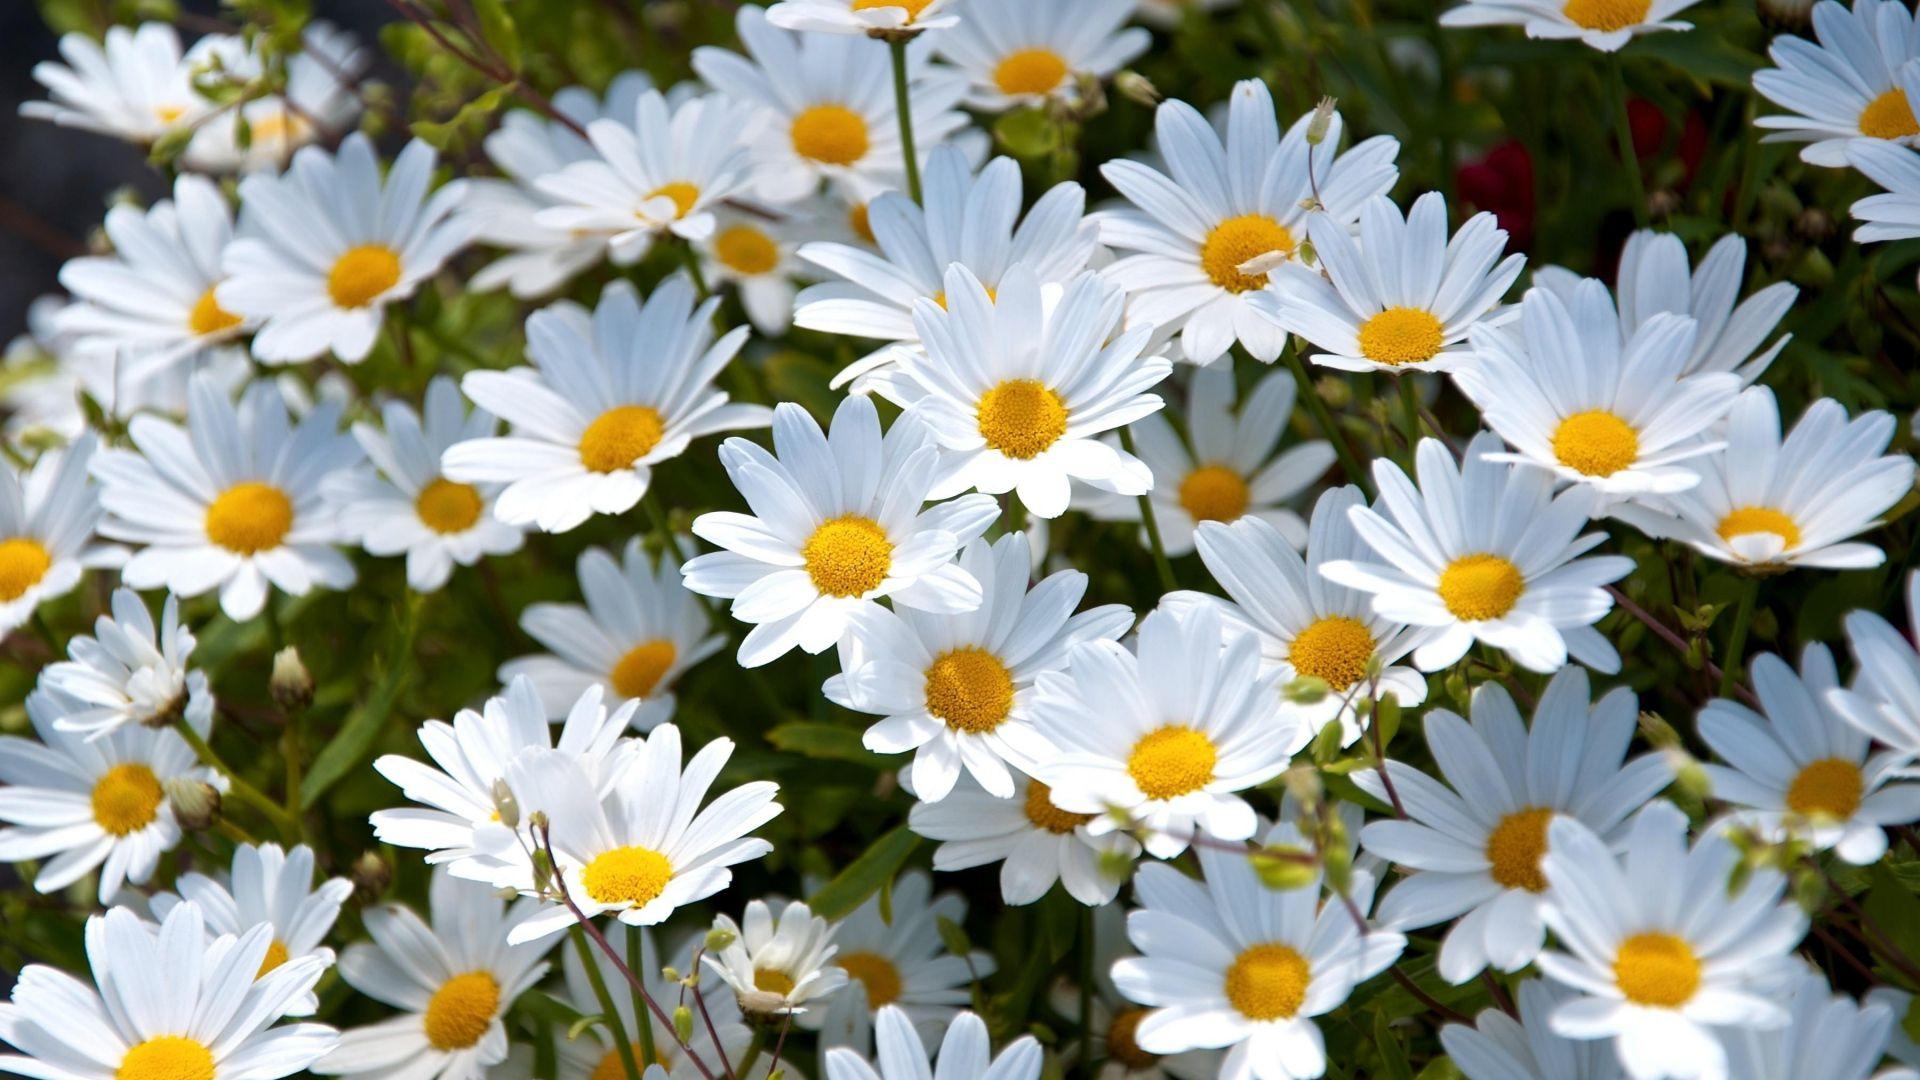 A field of white daisies with yellow centers. - Daisy